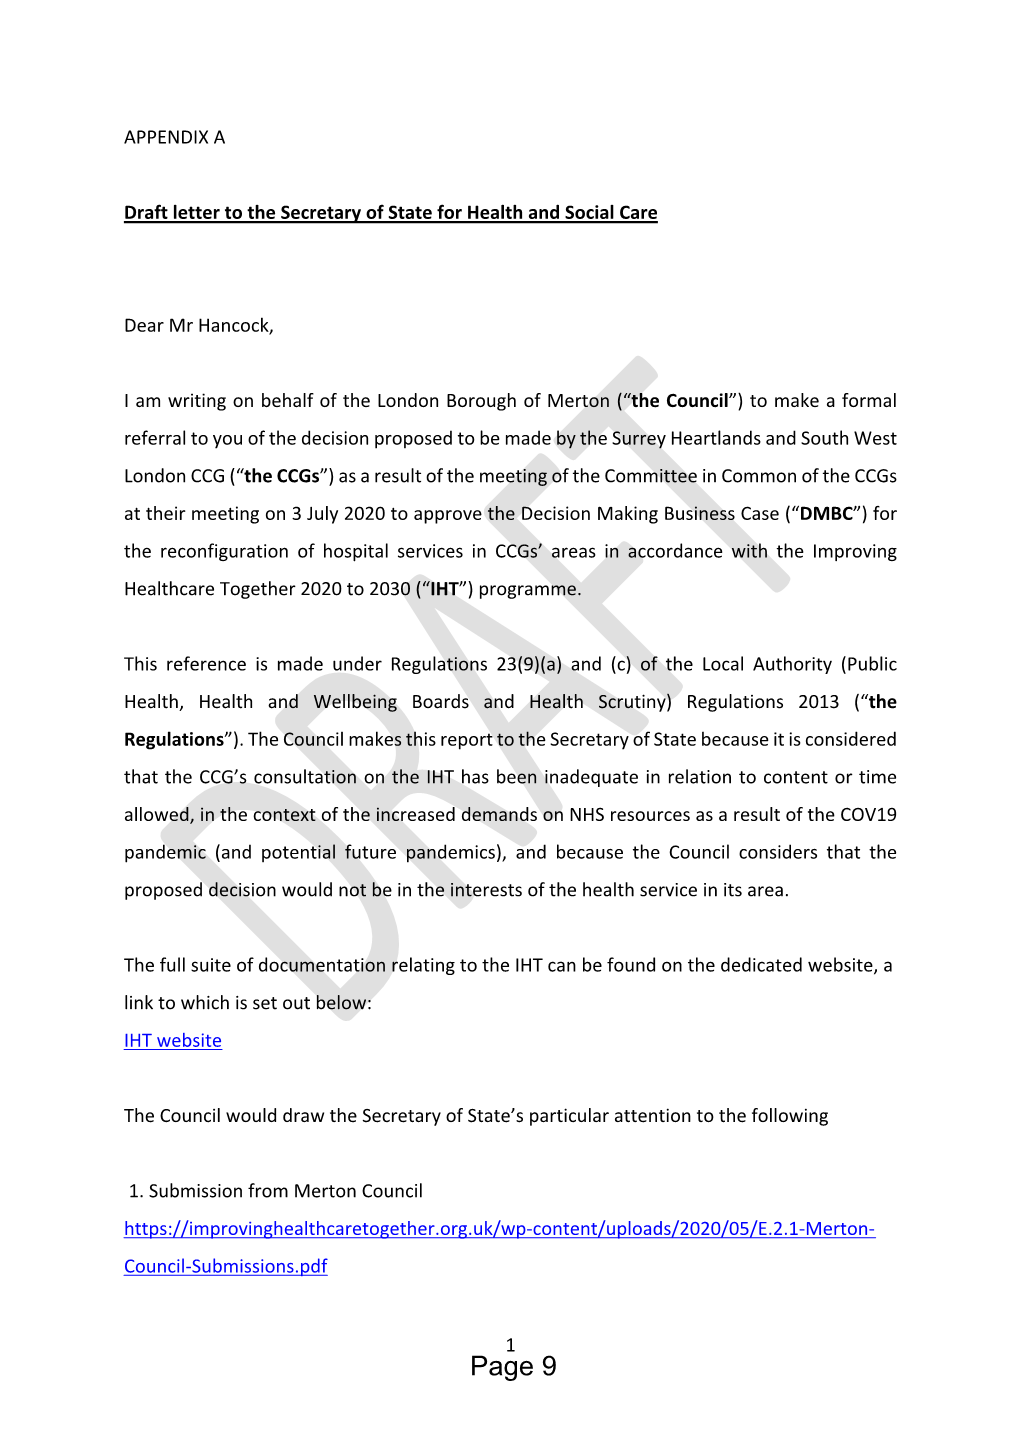 14 07 20 Draft Letter to the Secretary of State for Health